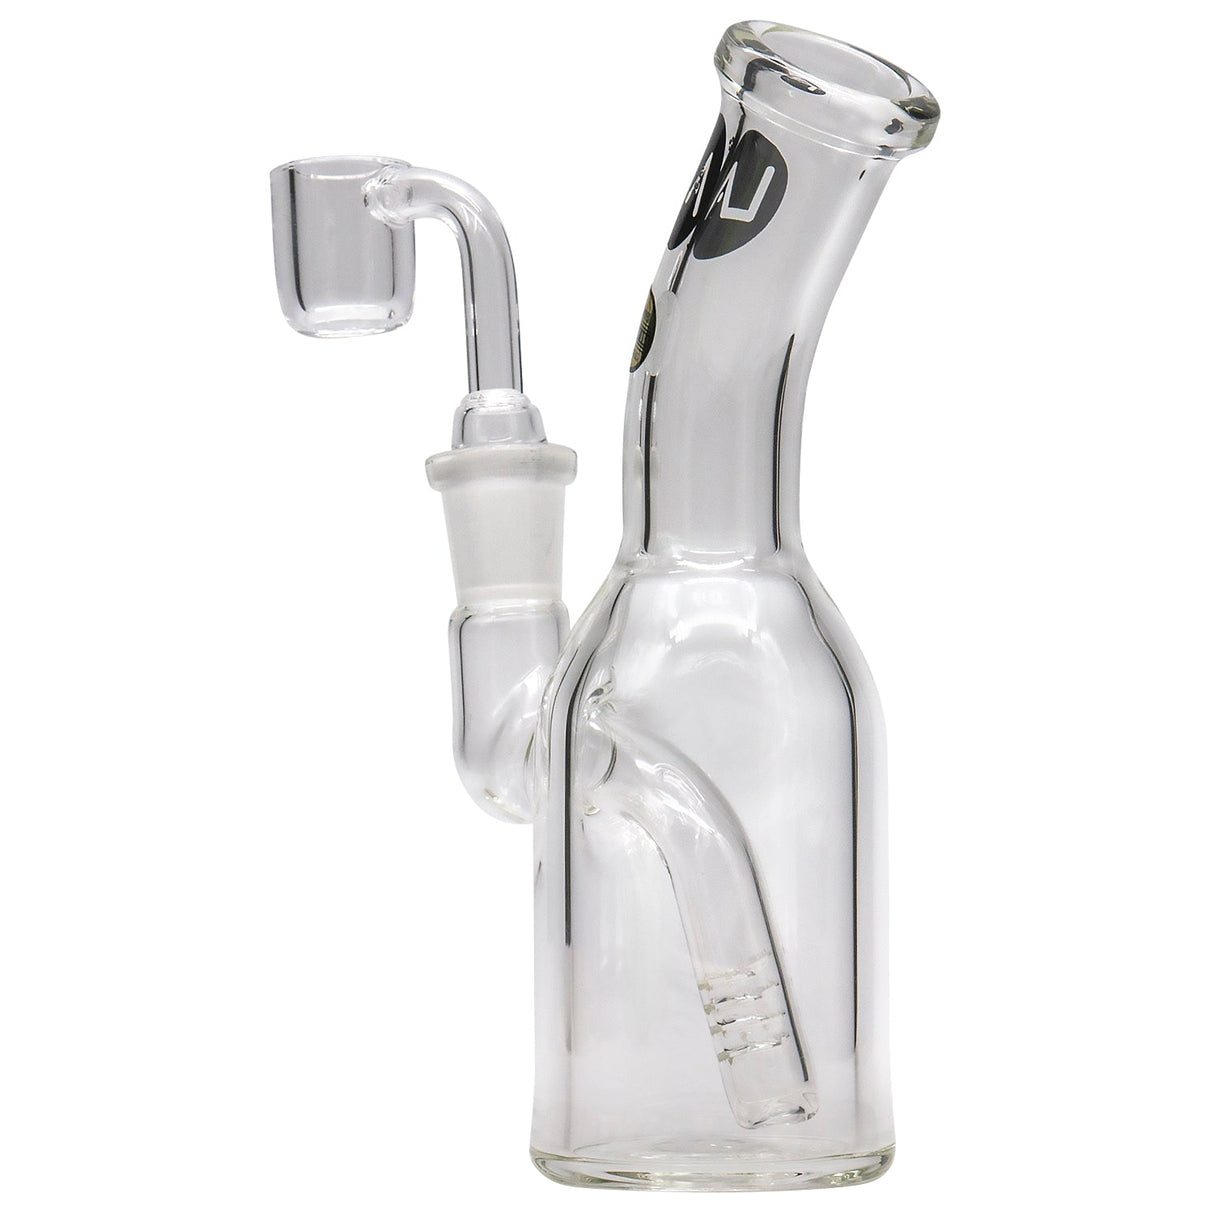 LA Pipes Compact Bent Neck Concentrate Waterpipe with Quartz Banger - Front View